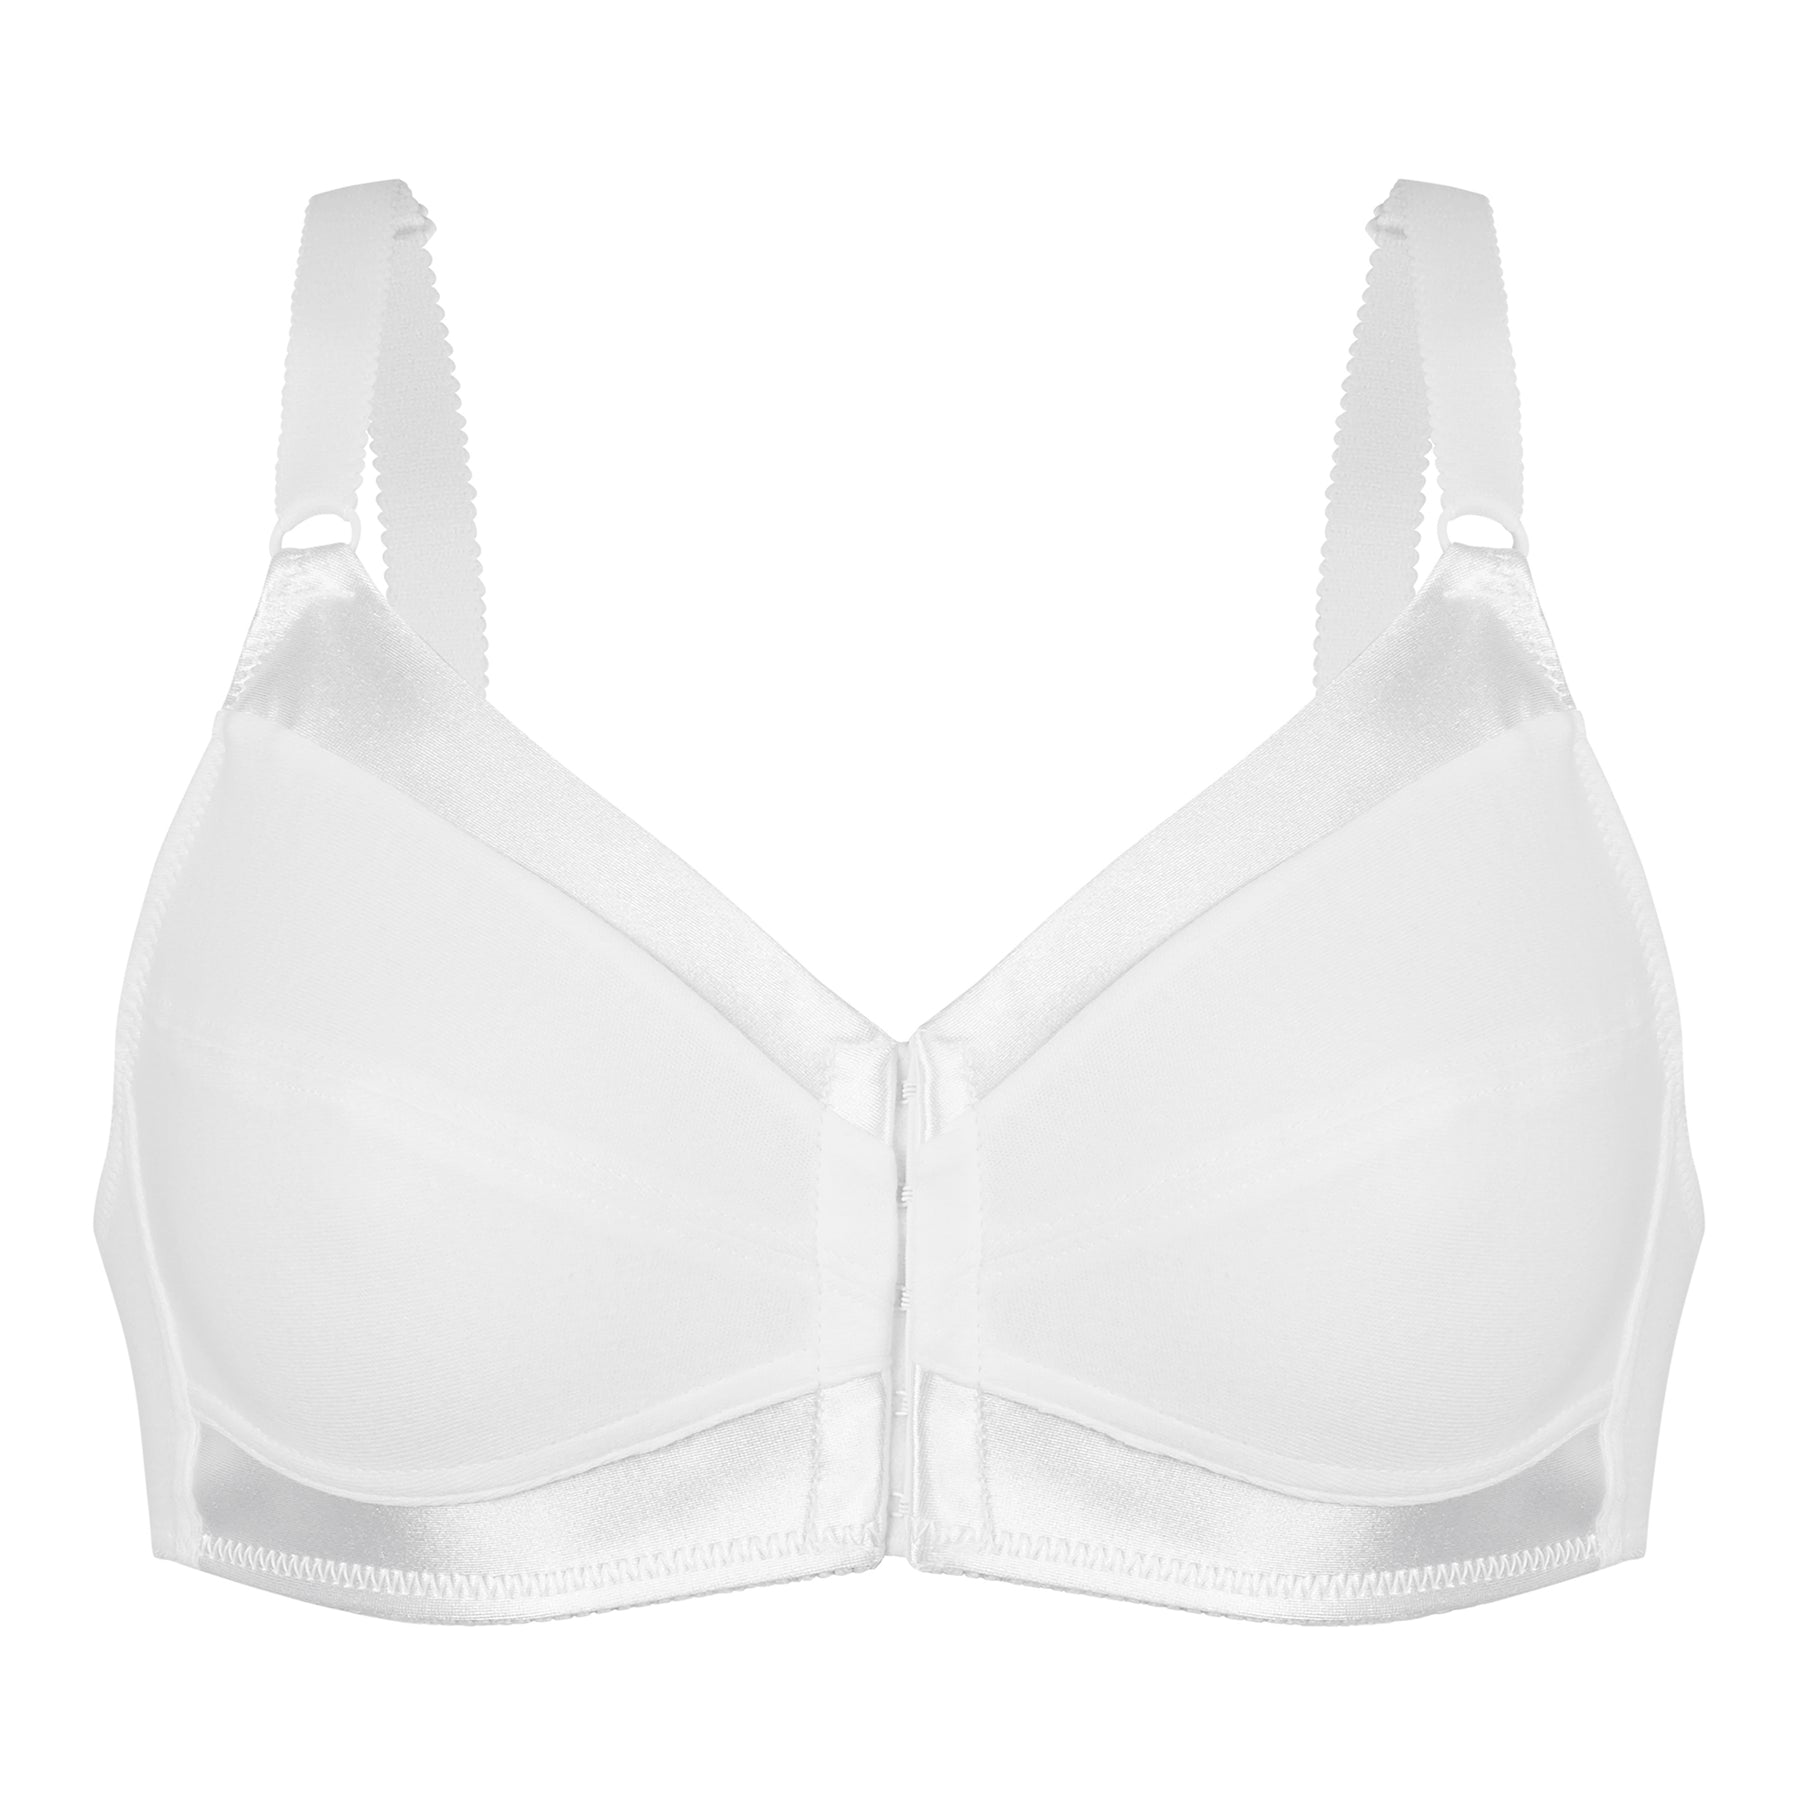 PENGXIANG Easy On Front Closure Wireless Comfort Bra for Women Wireless  Cotton Sleep Bras Size 80/36-100/44 